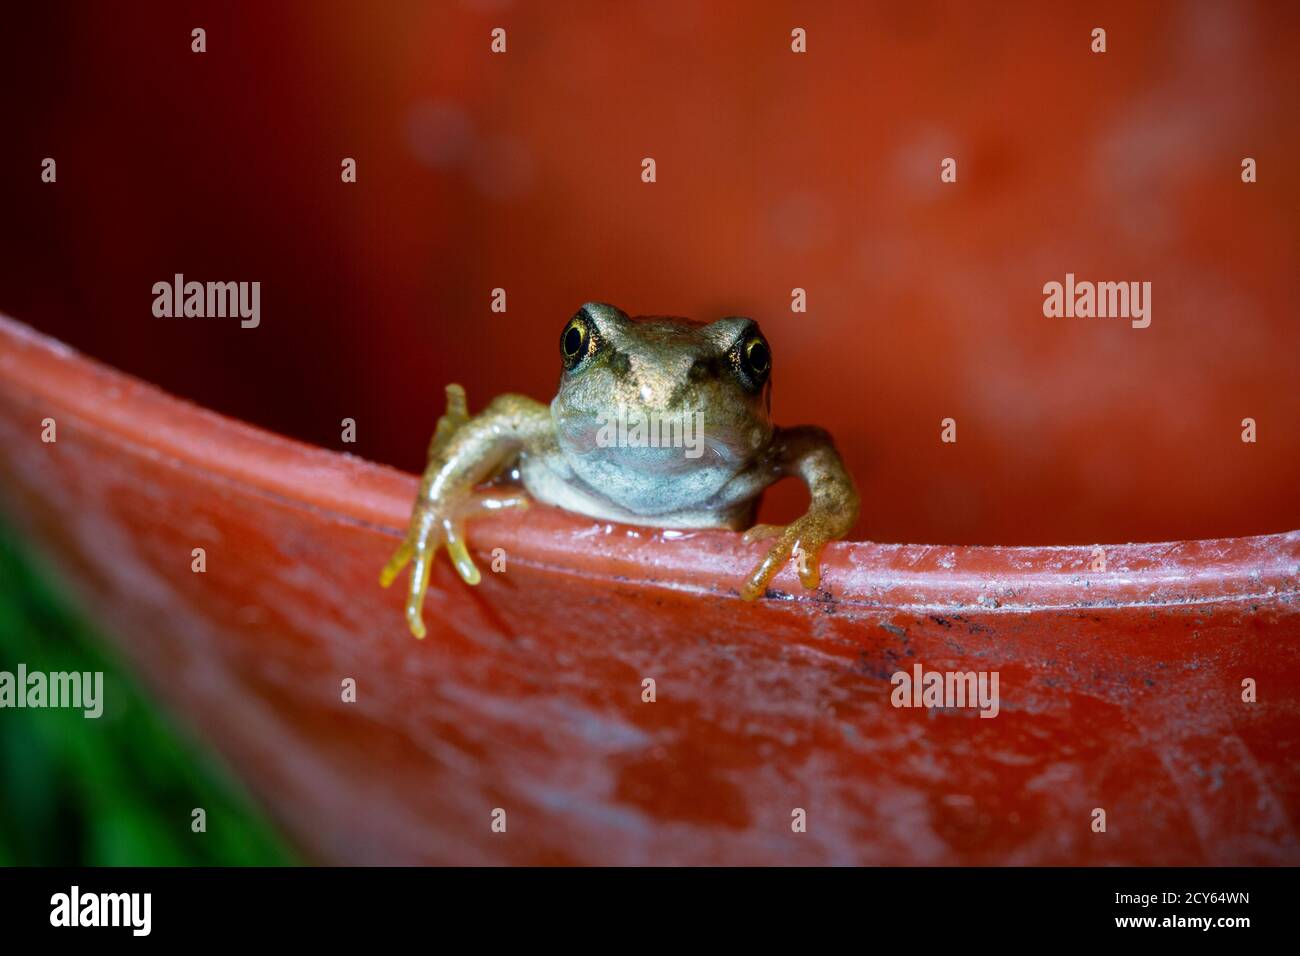 Froglet of the Common Frog (Rana temporaria) Crawling Out of a Tub Stock Photo